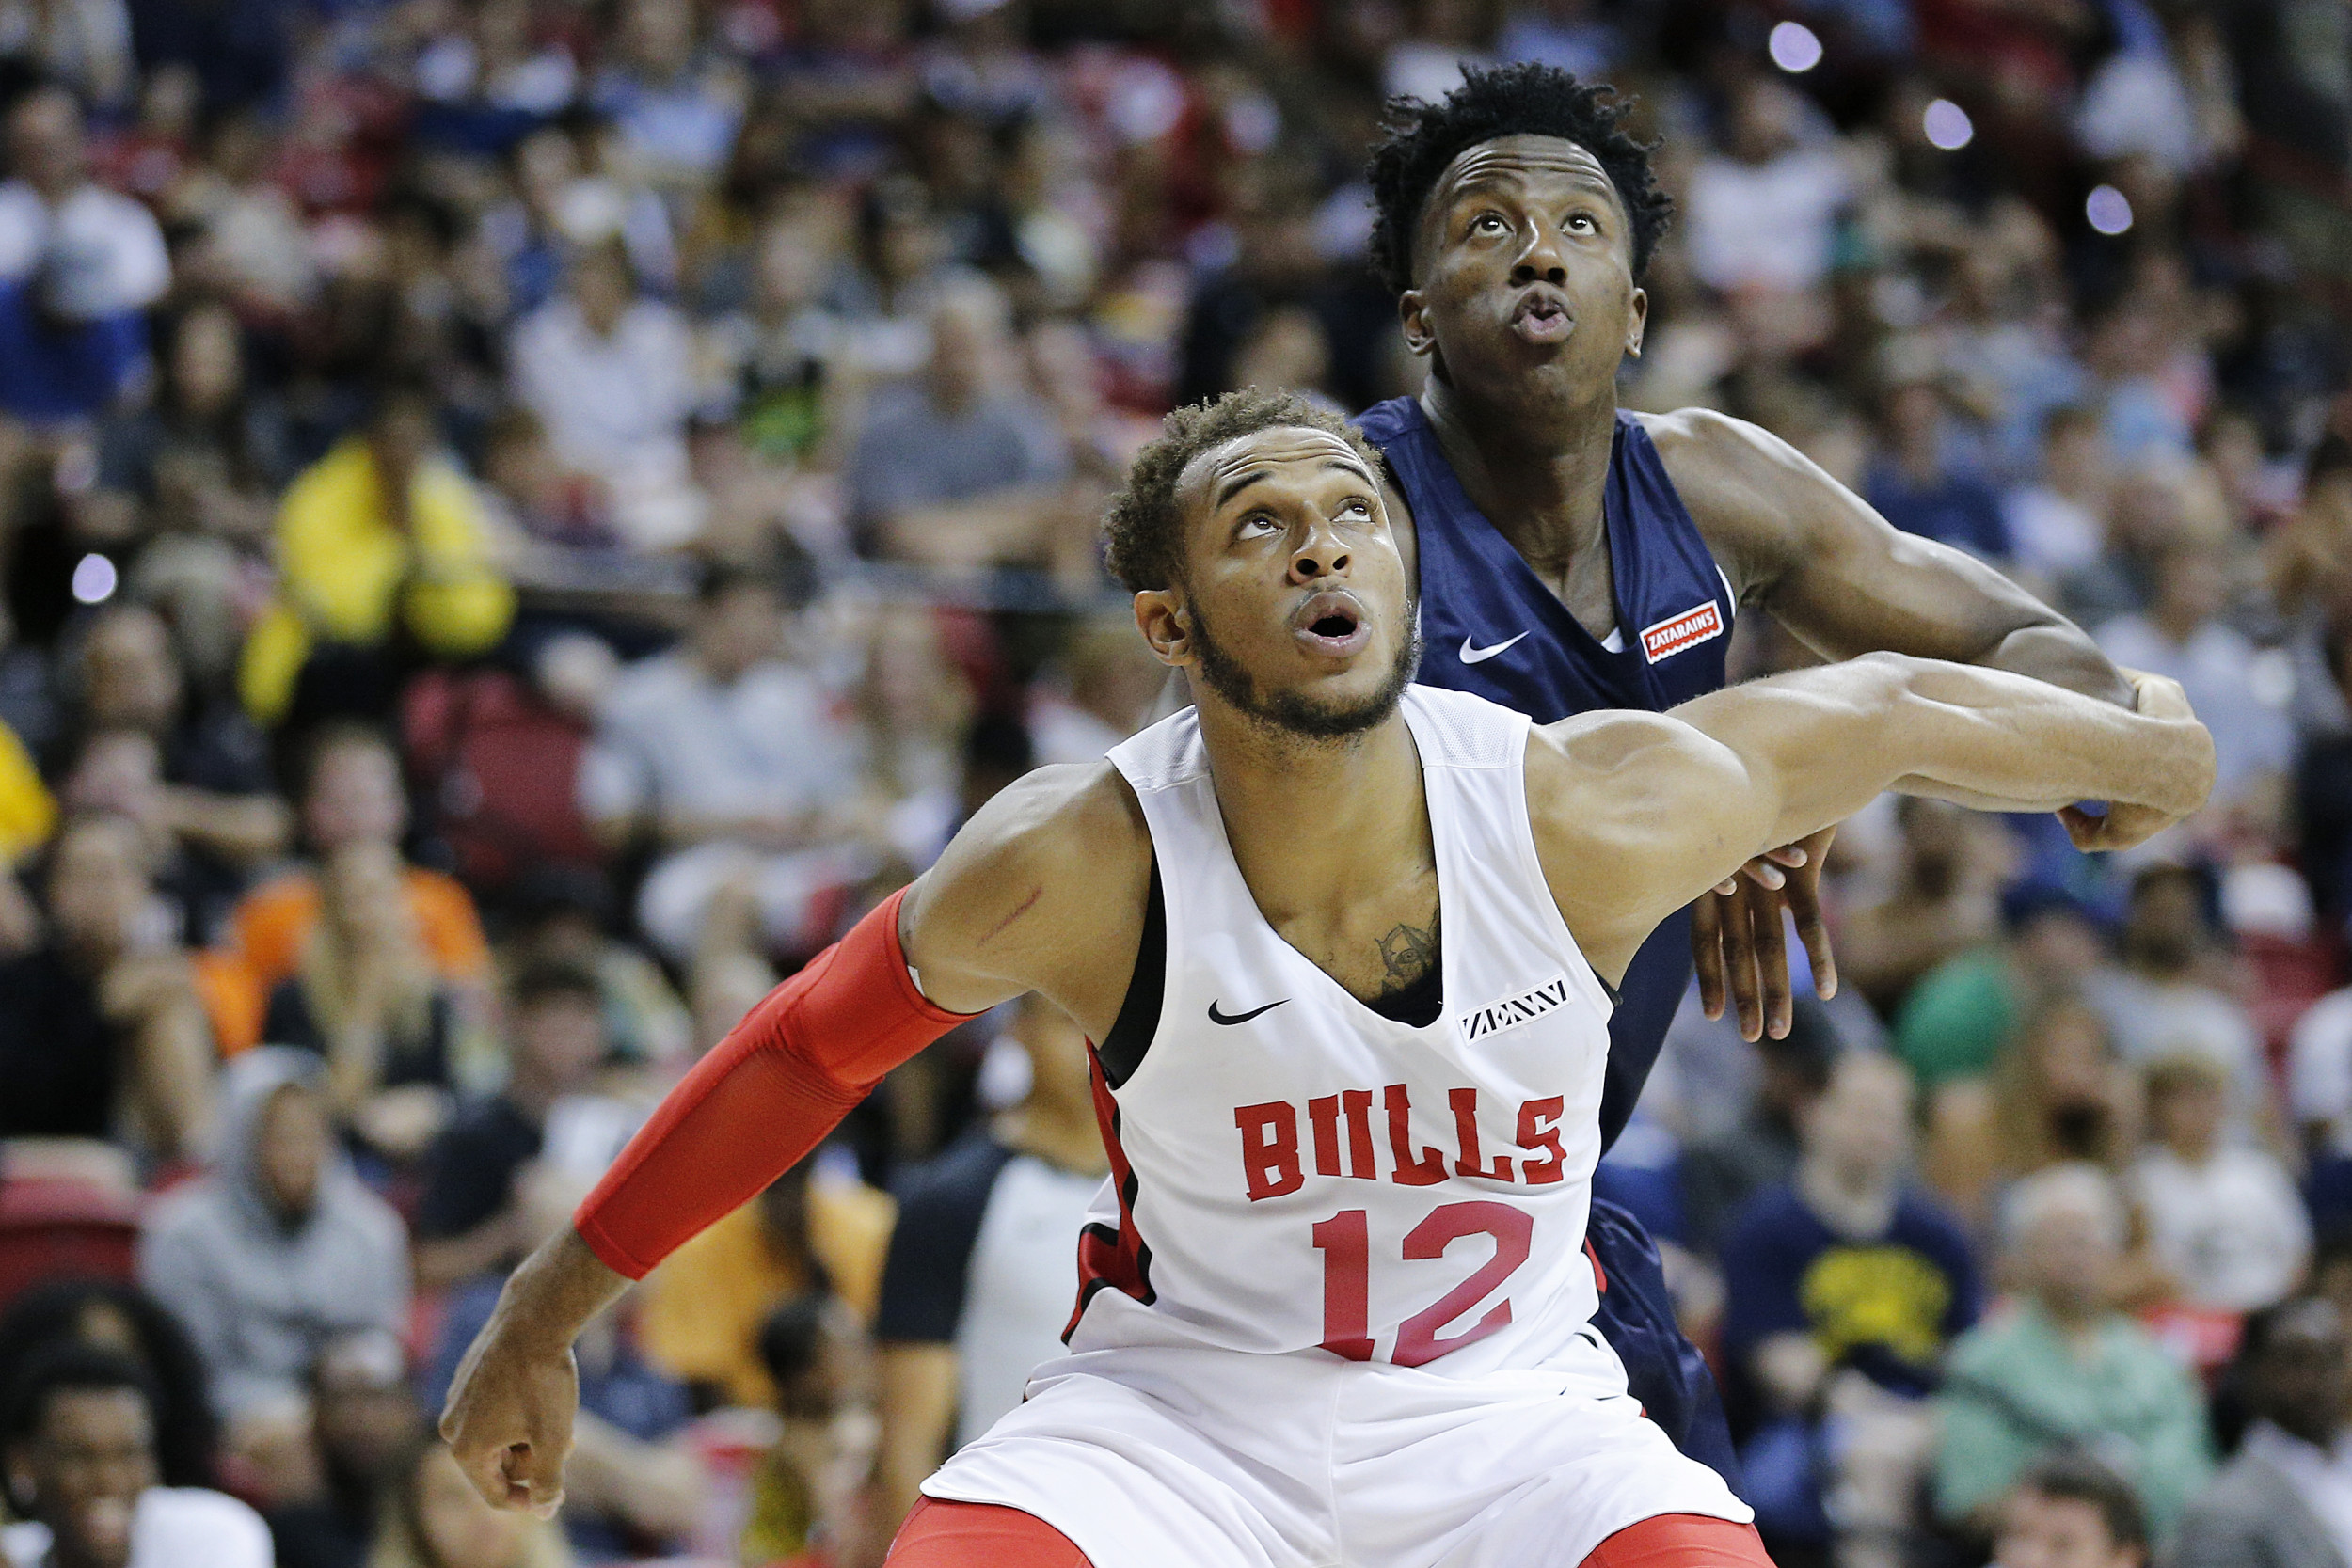 NBA Summer League 2019 How to Watch, Live Stream Games, Dates, Full